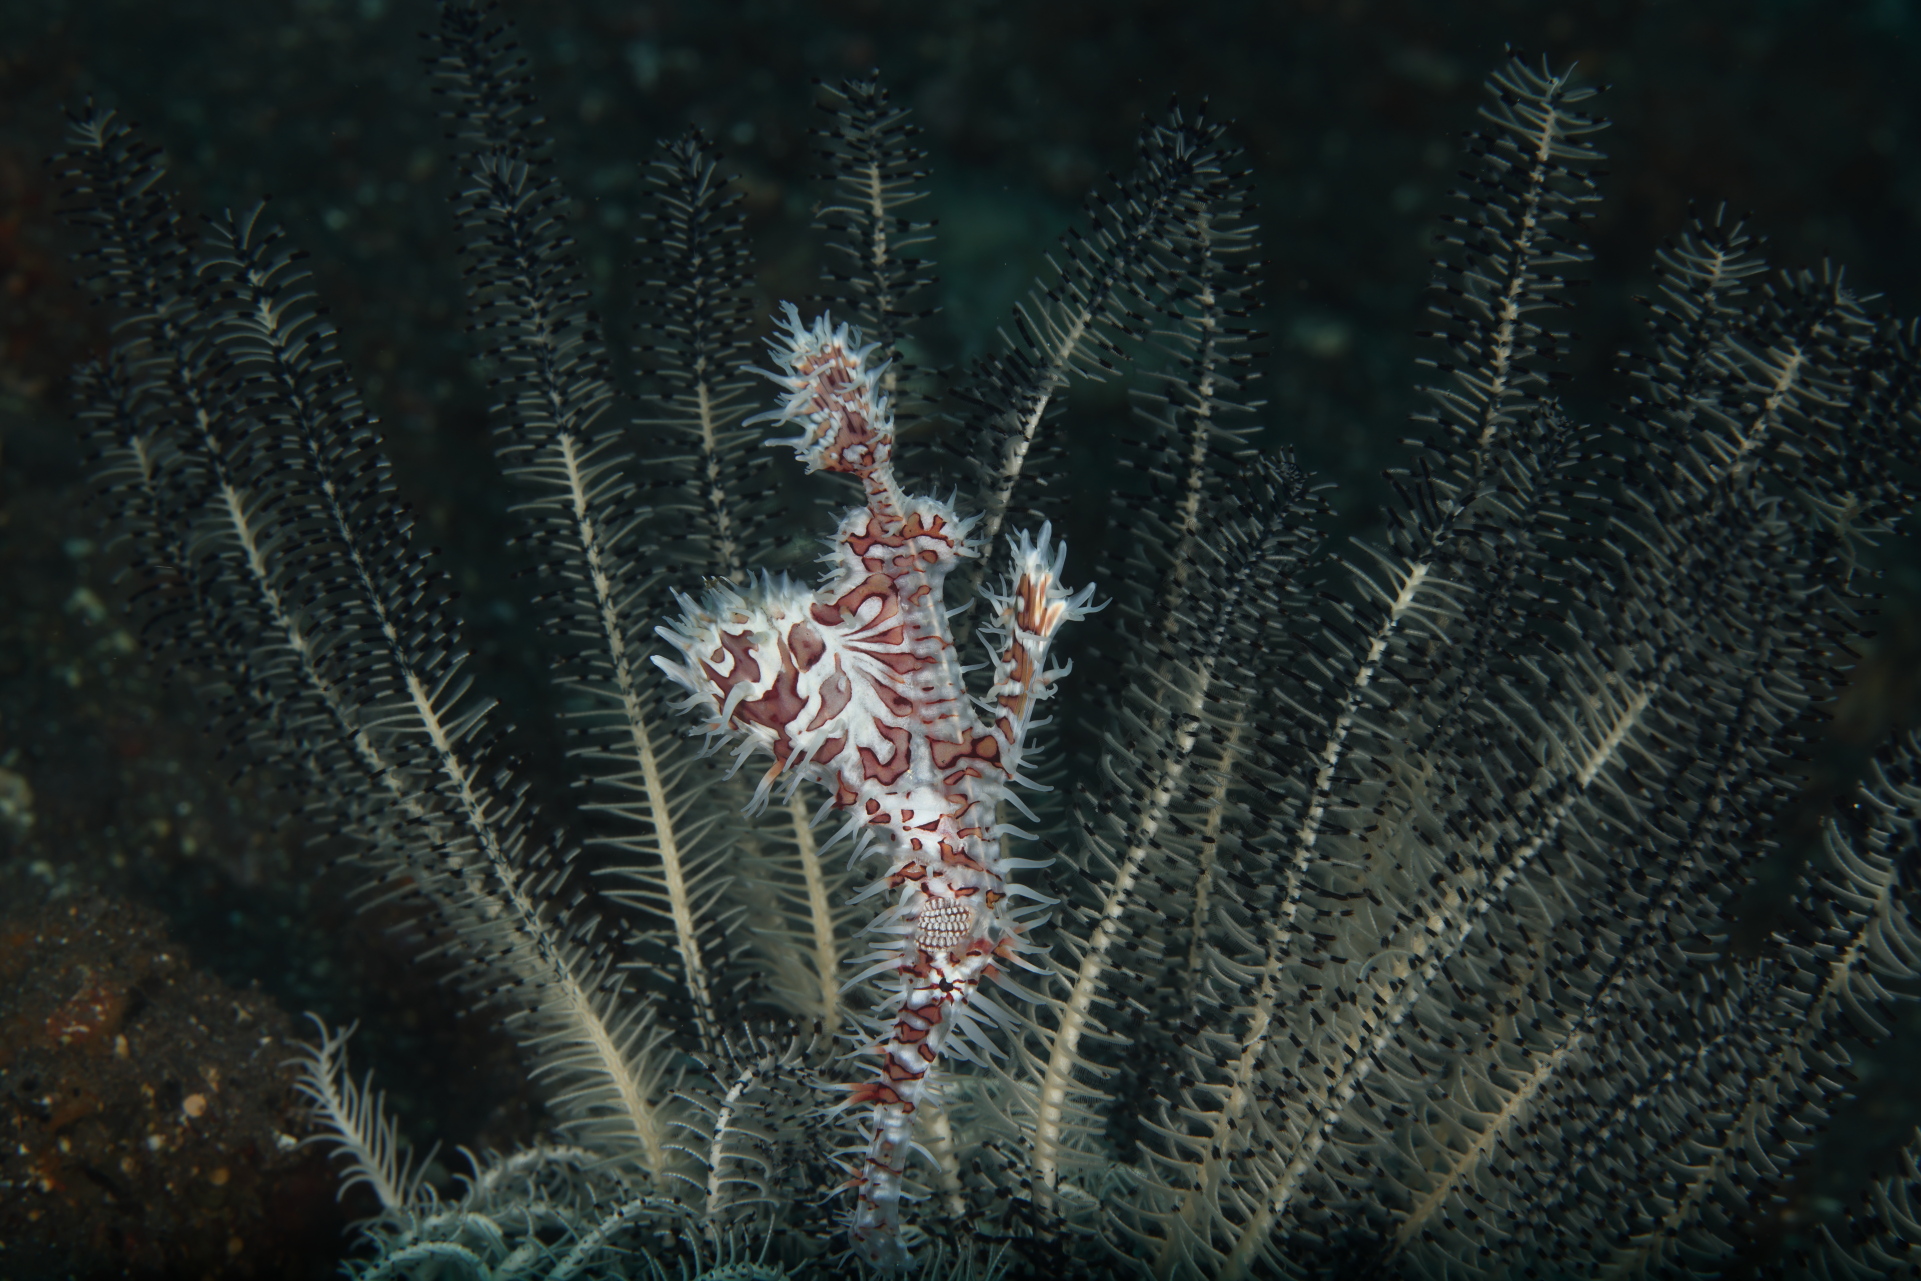 Ornate Ghost Pipefish in Crynoid (Oct 5, 2023)